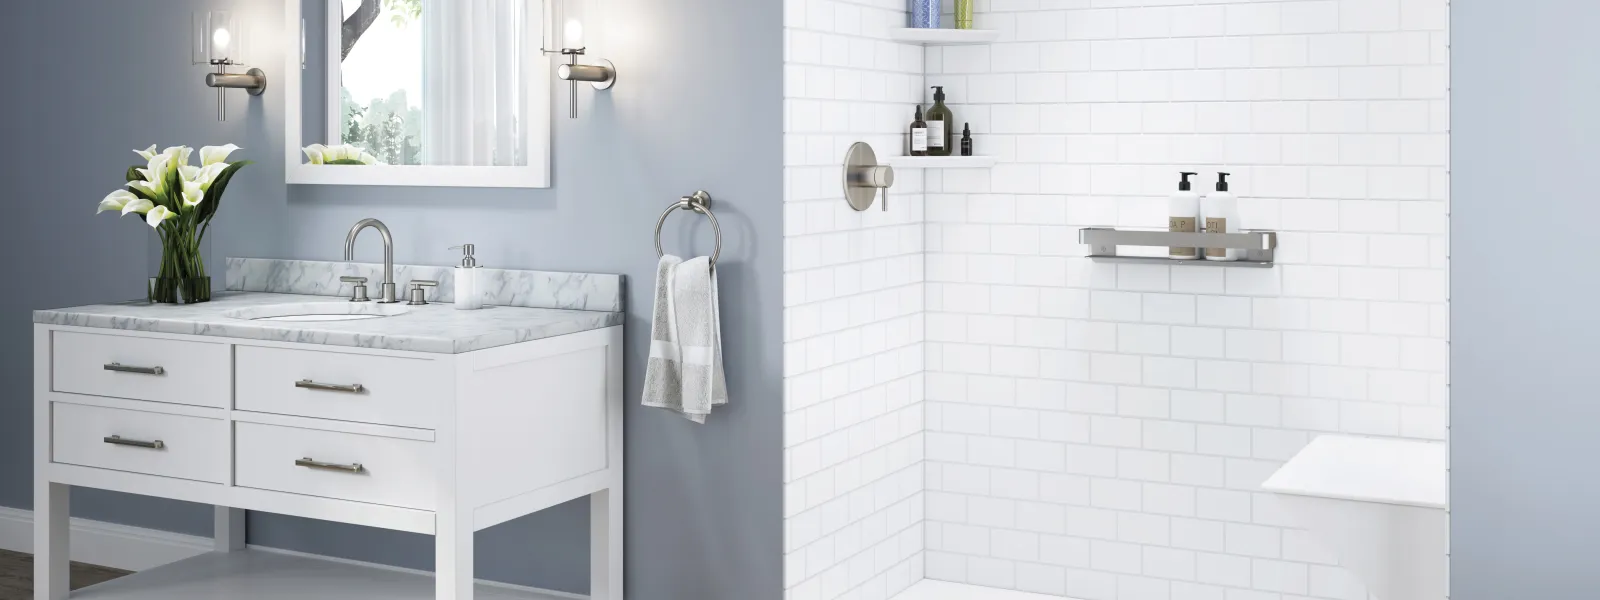 5 Ideas for Making Your Shower Safer